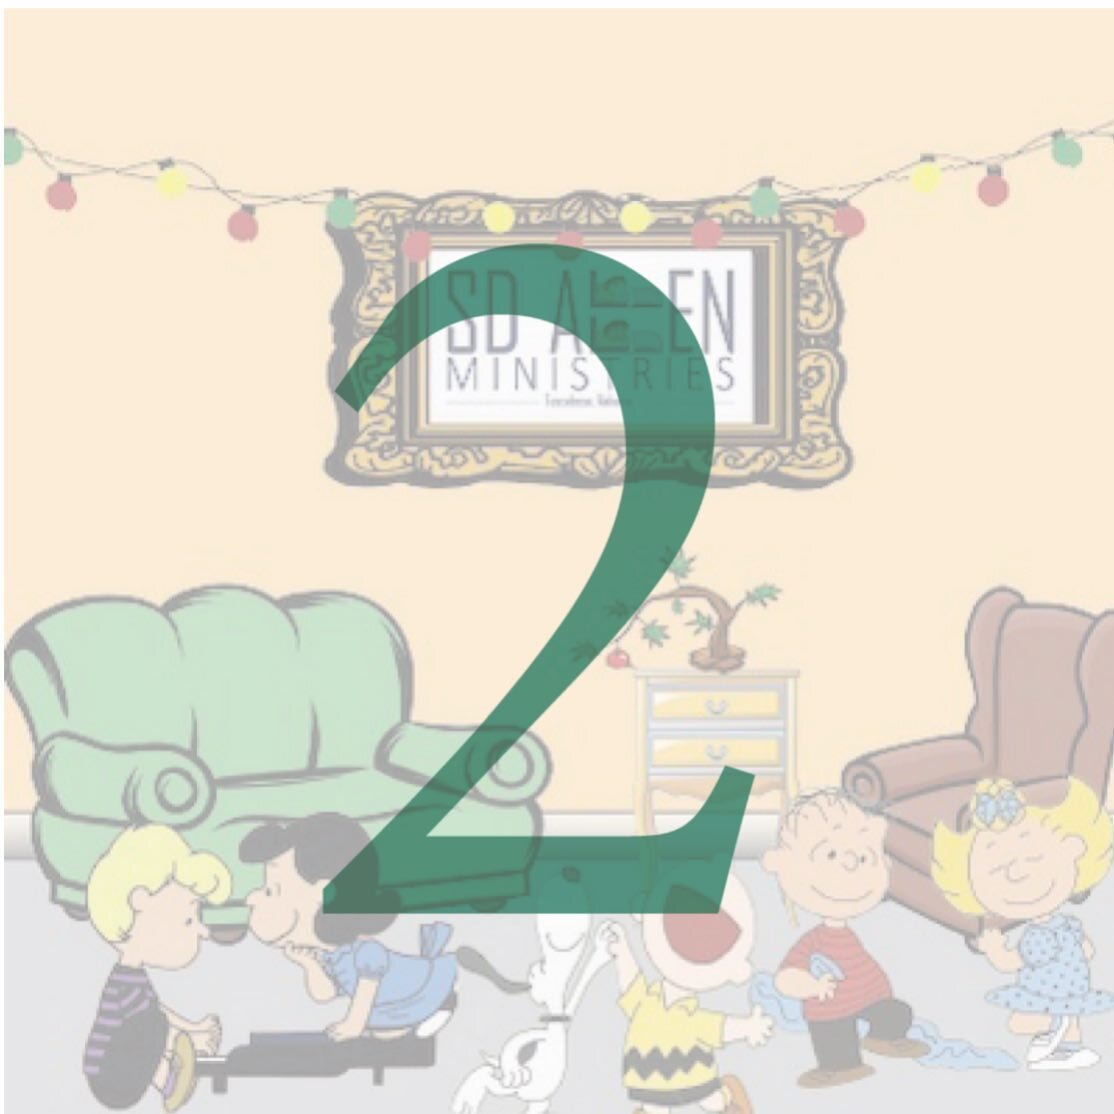 The Tinsel Trail opens in just 2 days and we are just as excited as Charlie and Snoopy are. Our team had so much fun decorating this year and we can't wait for you to see it!
 
#sdallen